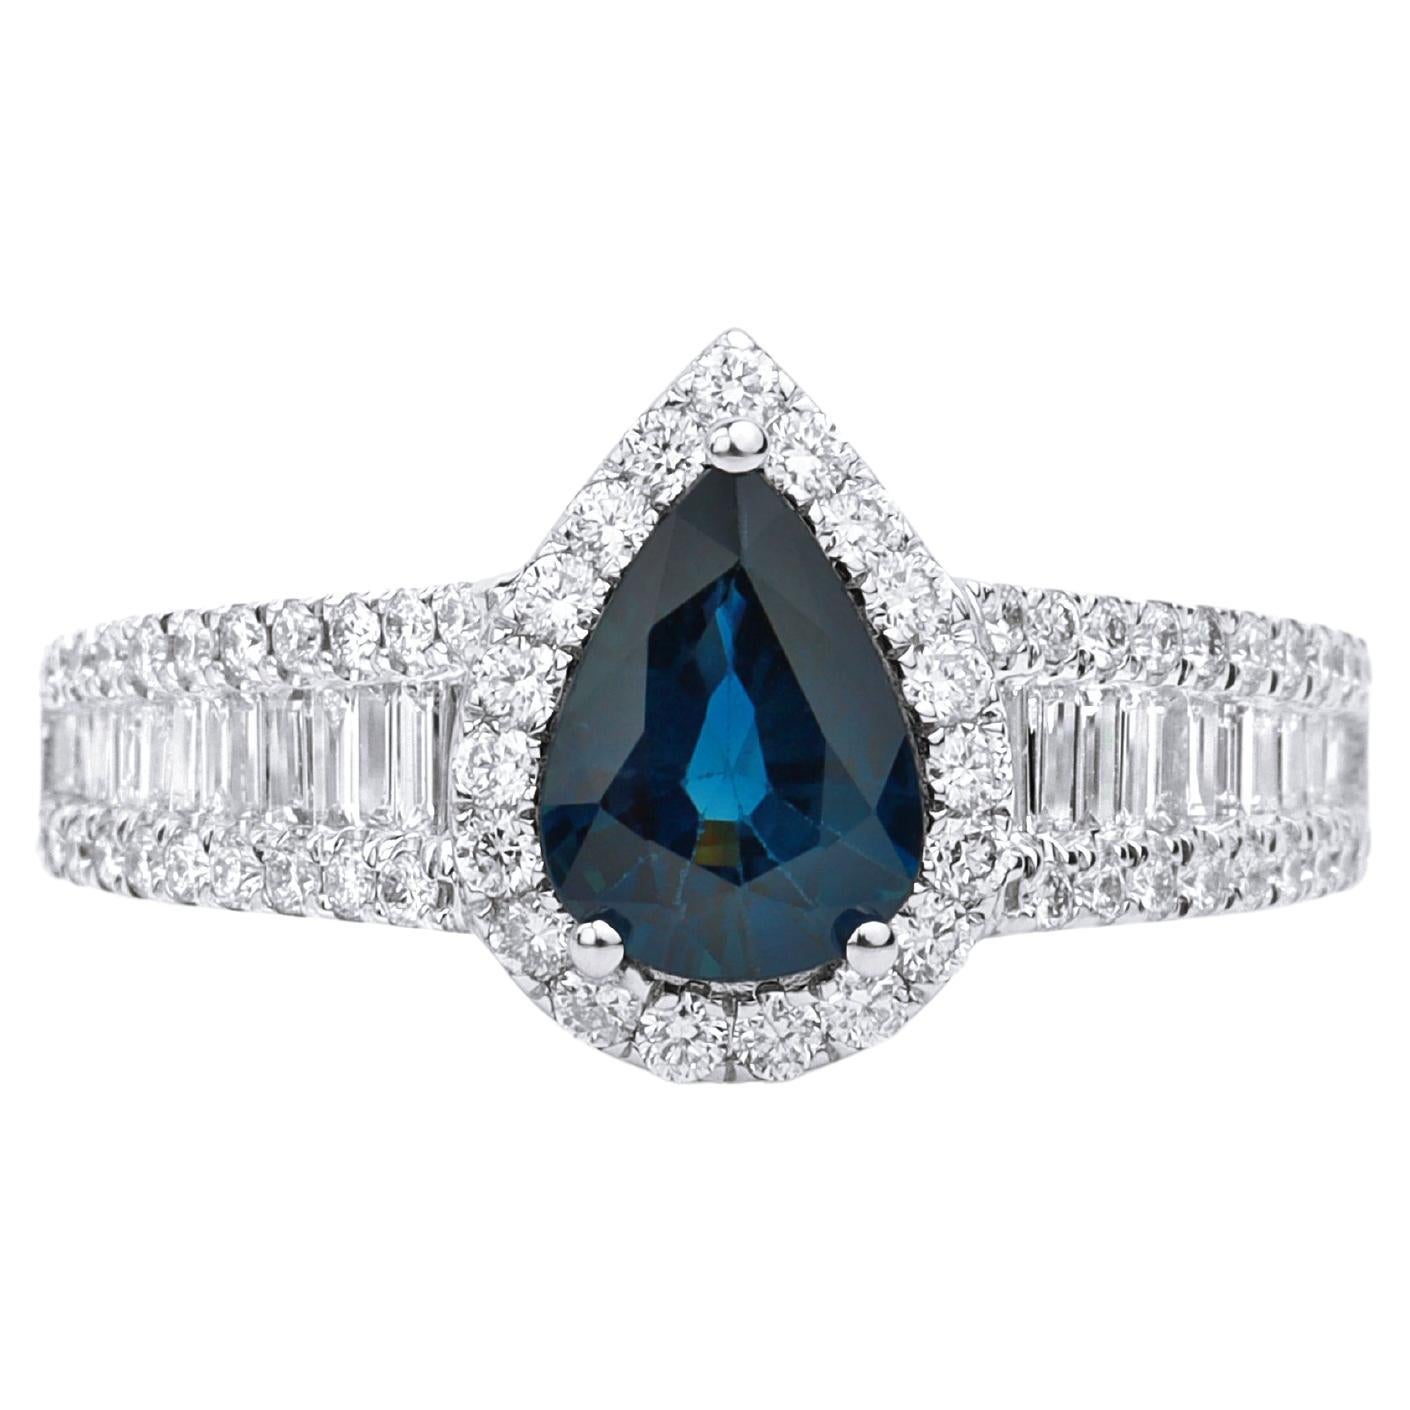 Pear Blue Sapphire Diamond Halo Cocktail Engagement Proposal Ring For Her